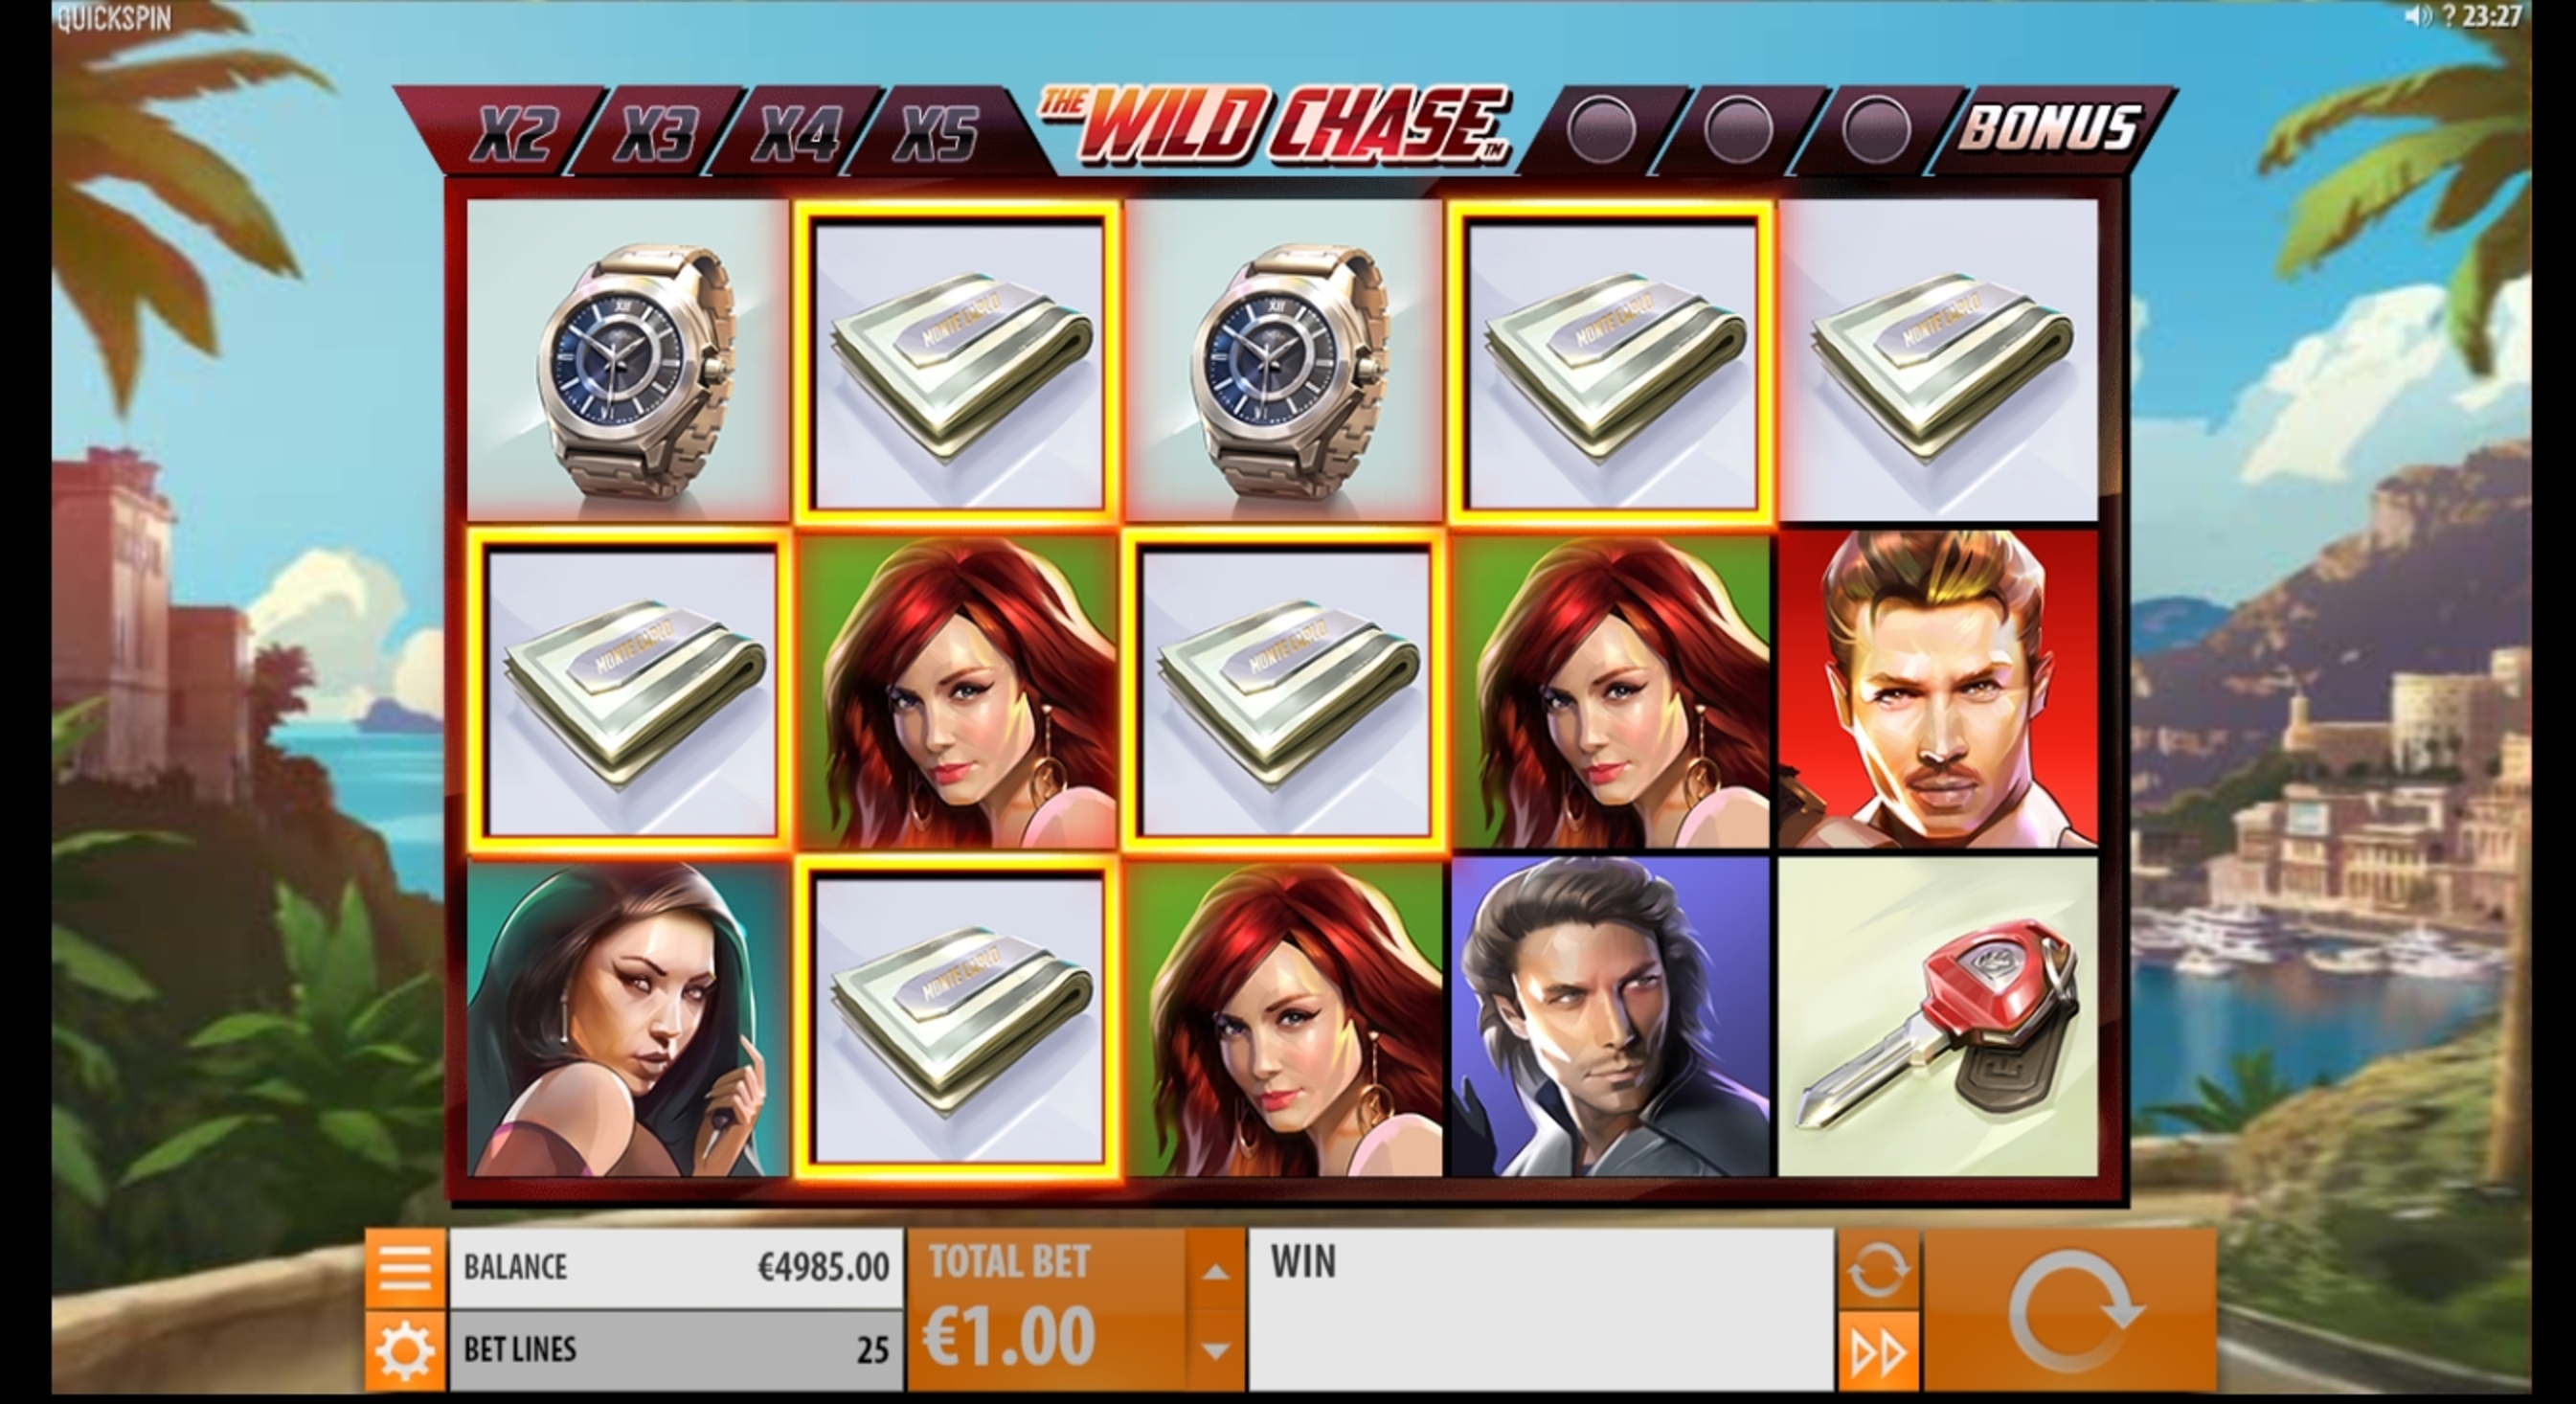 Win Money in The Wild Chase Free Slot Game by Quickspin